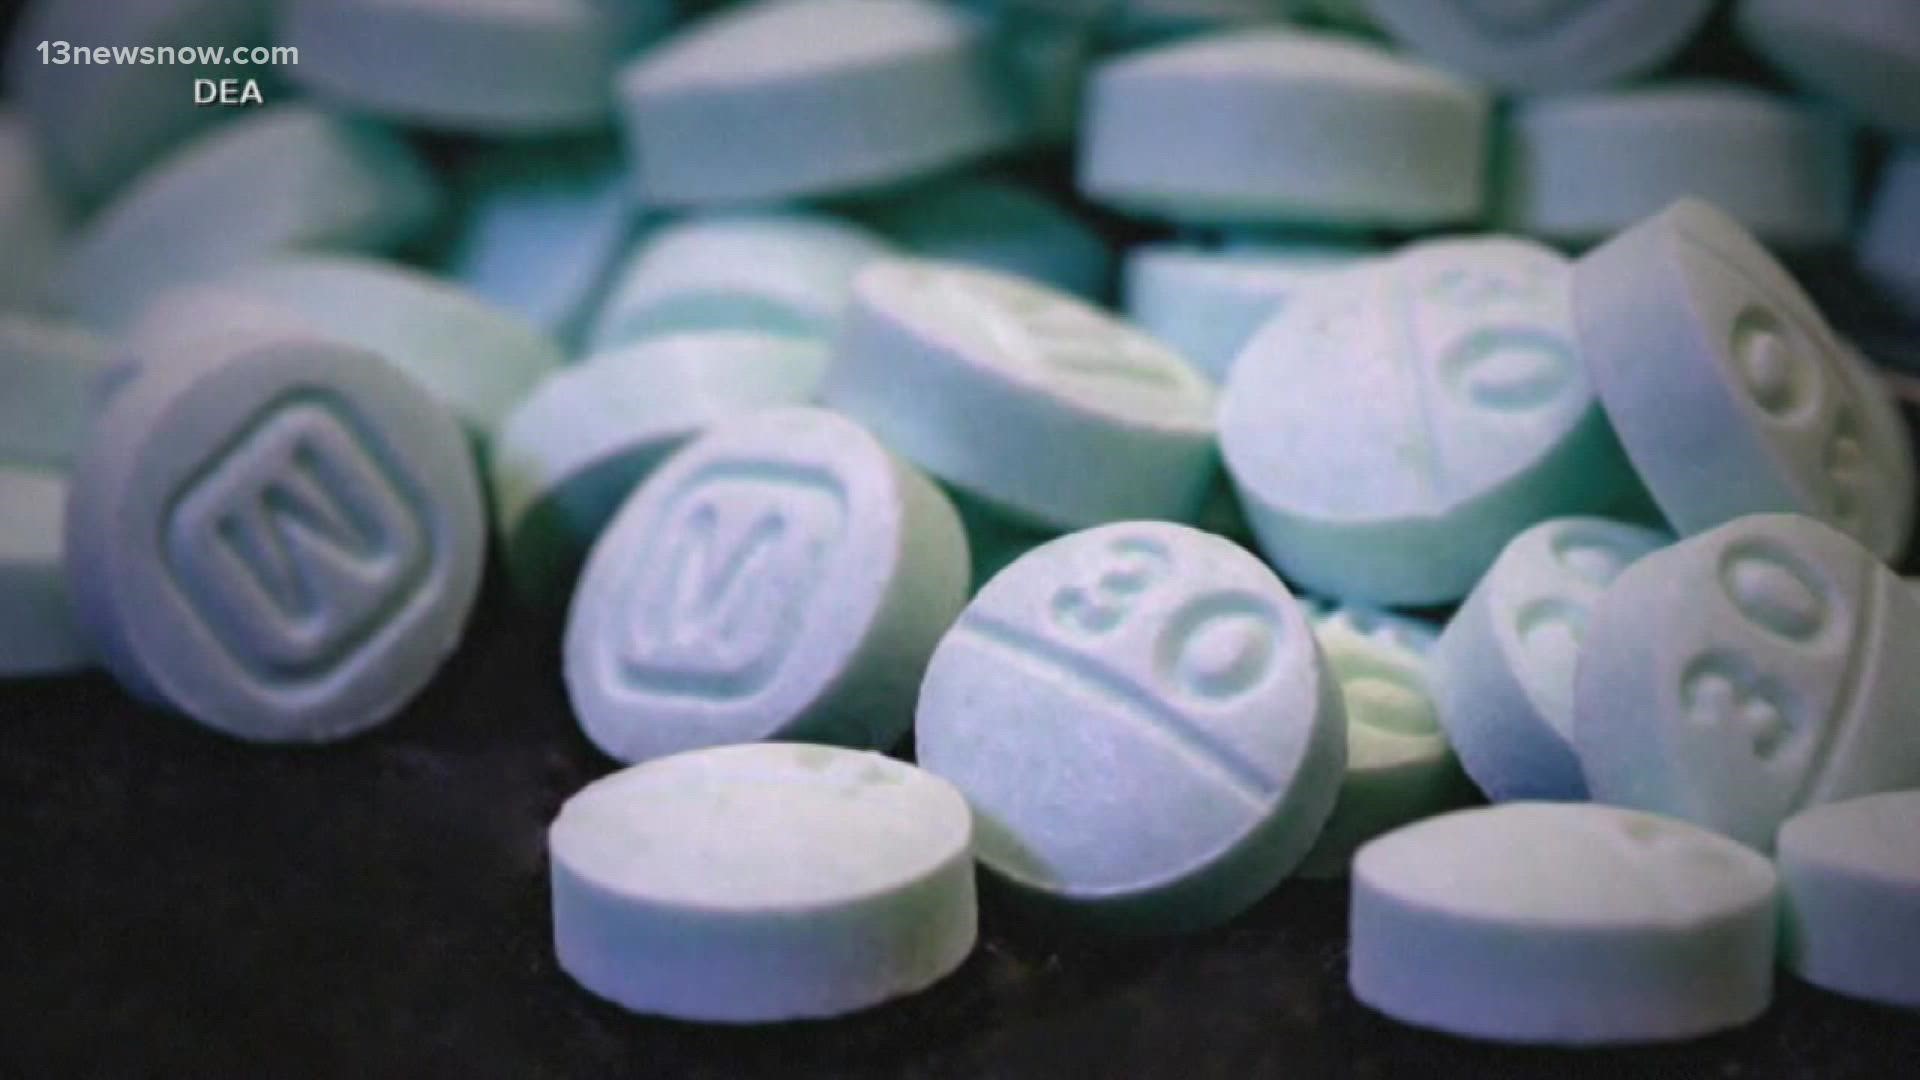 Fentanyl, a synthetic opioid is considered 50 times more potent than heroin.